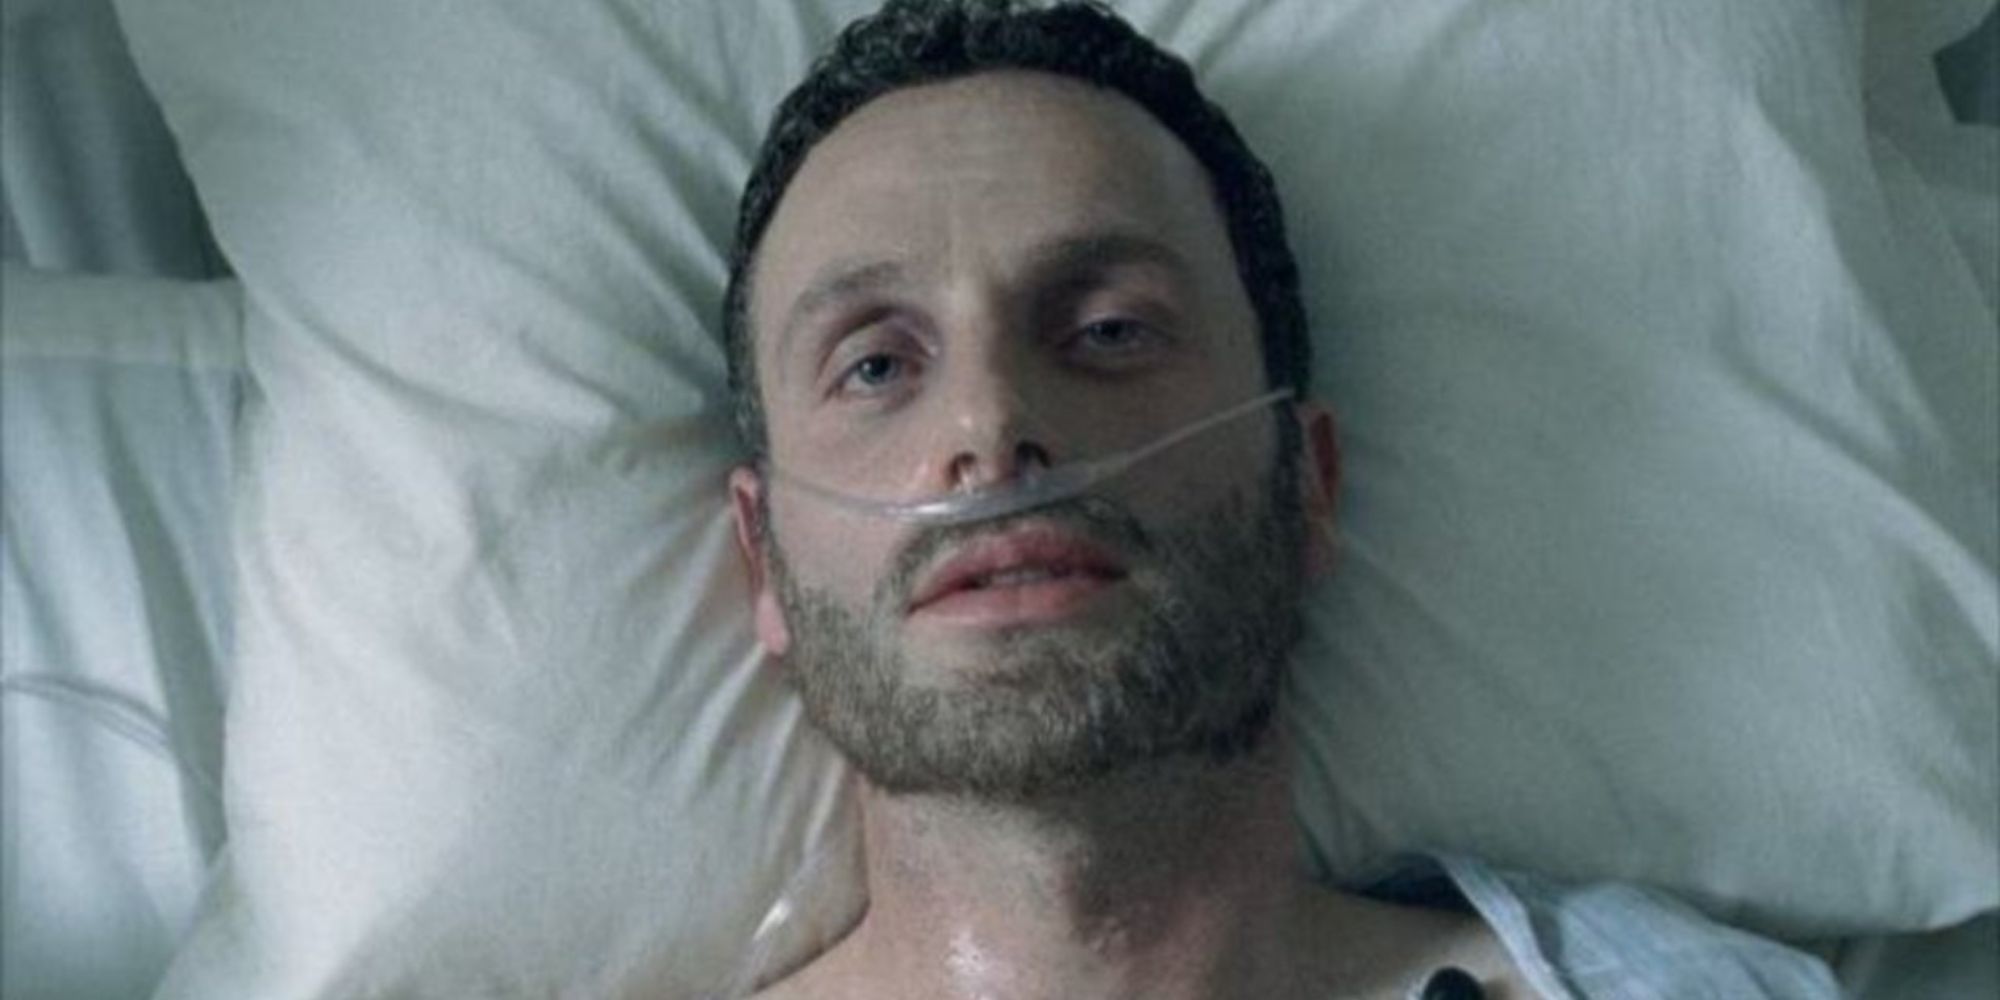 The Walking Dead 10 Scenes That Make Viewers Nervous When Rewatching